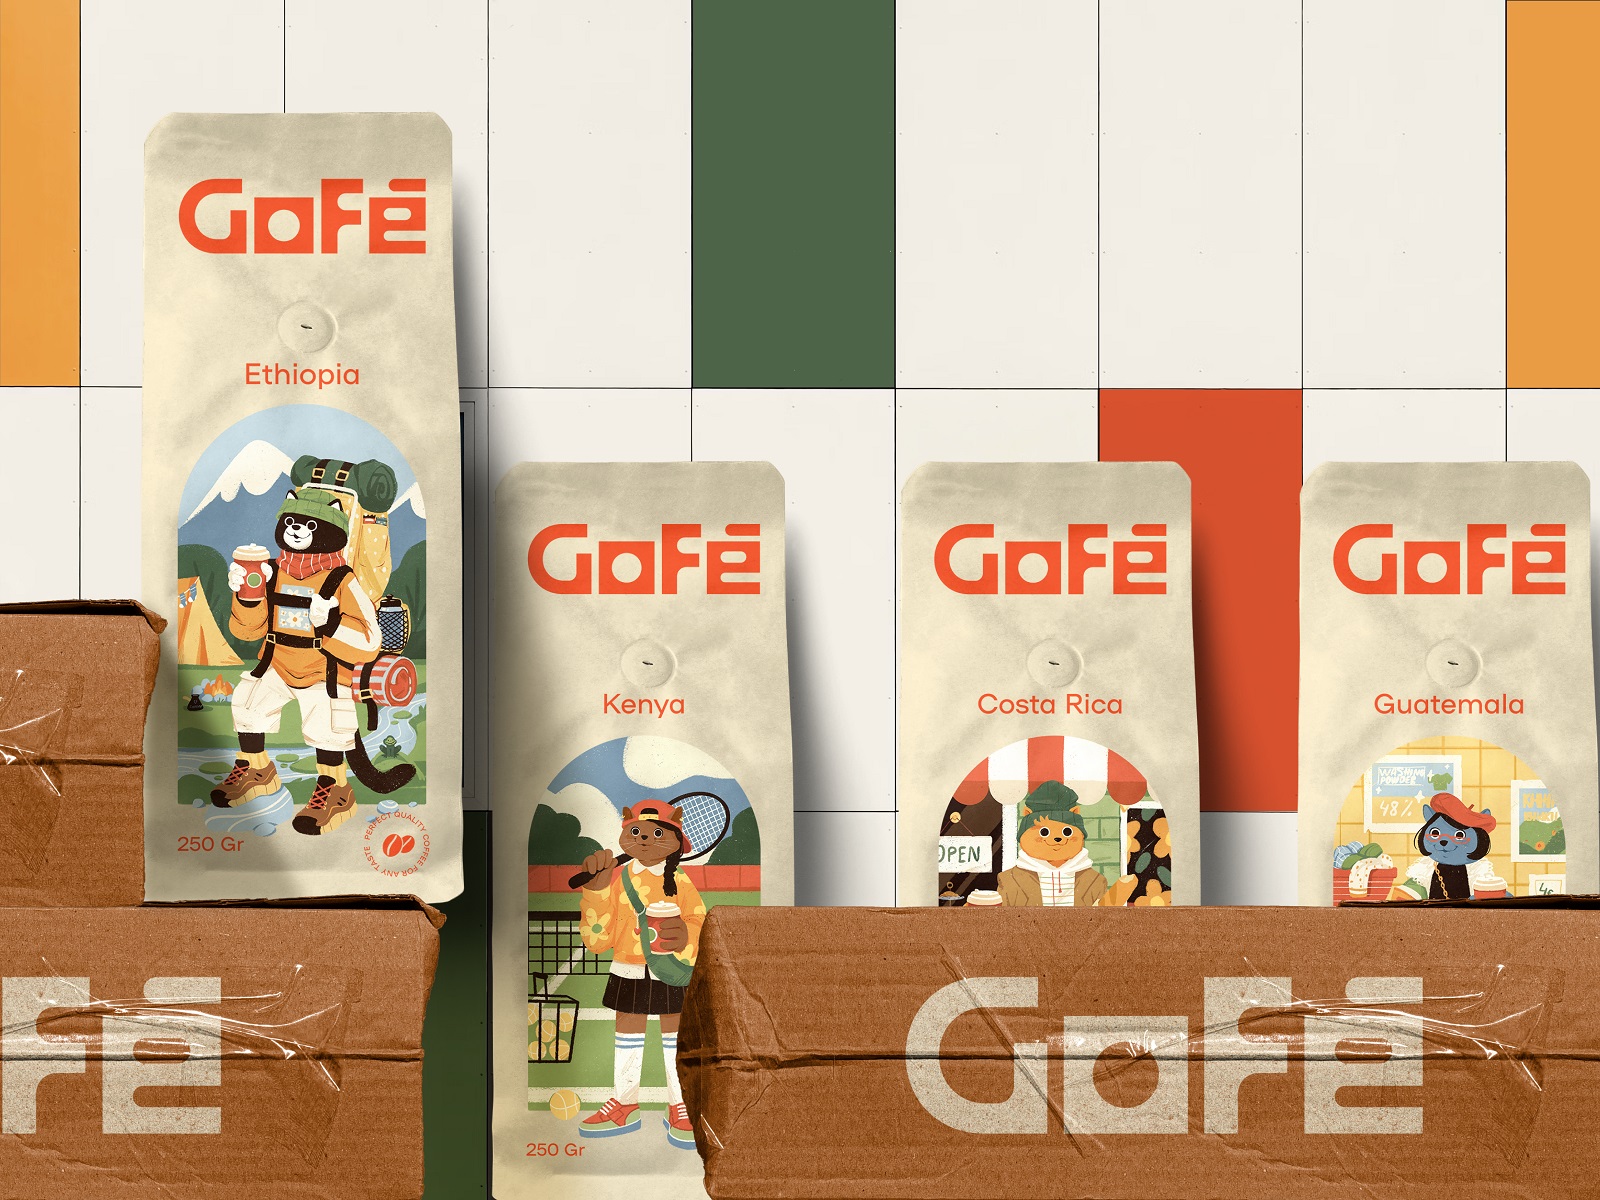 Case Study: Gofe. Packaging and Marketing Design for Coffee Brand